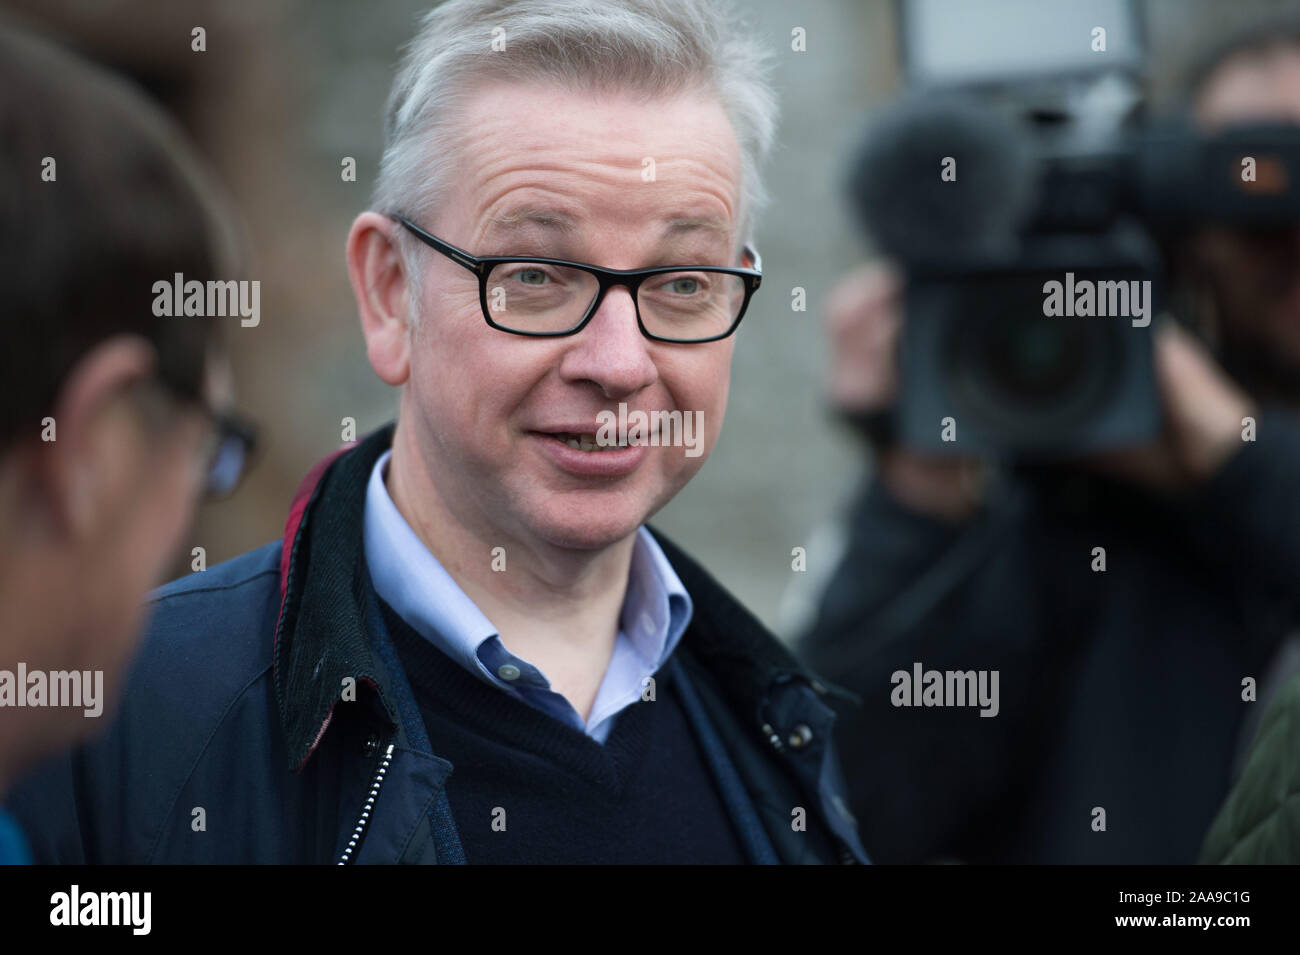 EMBARGOED UNTIL 17:30 TODAY (20TH NOVEMBER 2019) Glasgow, UK. 20th Nov, 2019. Pictured: Michael Gove MP - Chancellor of the Duchy of Lancaster. Mr Gove is seen campaigning in Scotland to secure the tory vote for the General Election on the 12th December. Credit: Colin Fisher/Alamy Live News Stock Photo